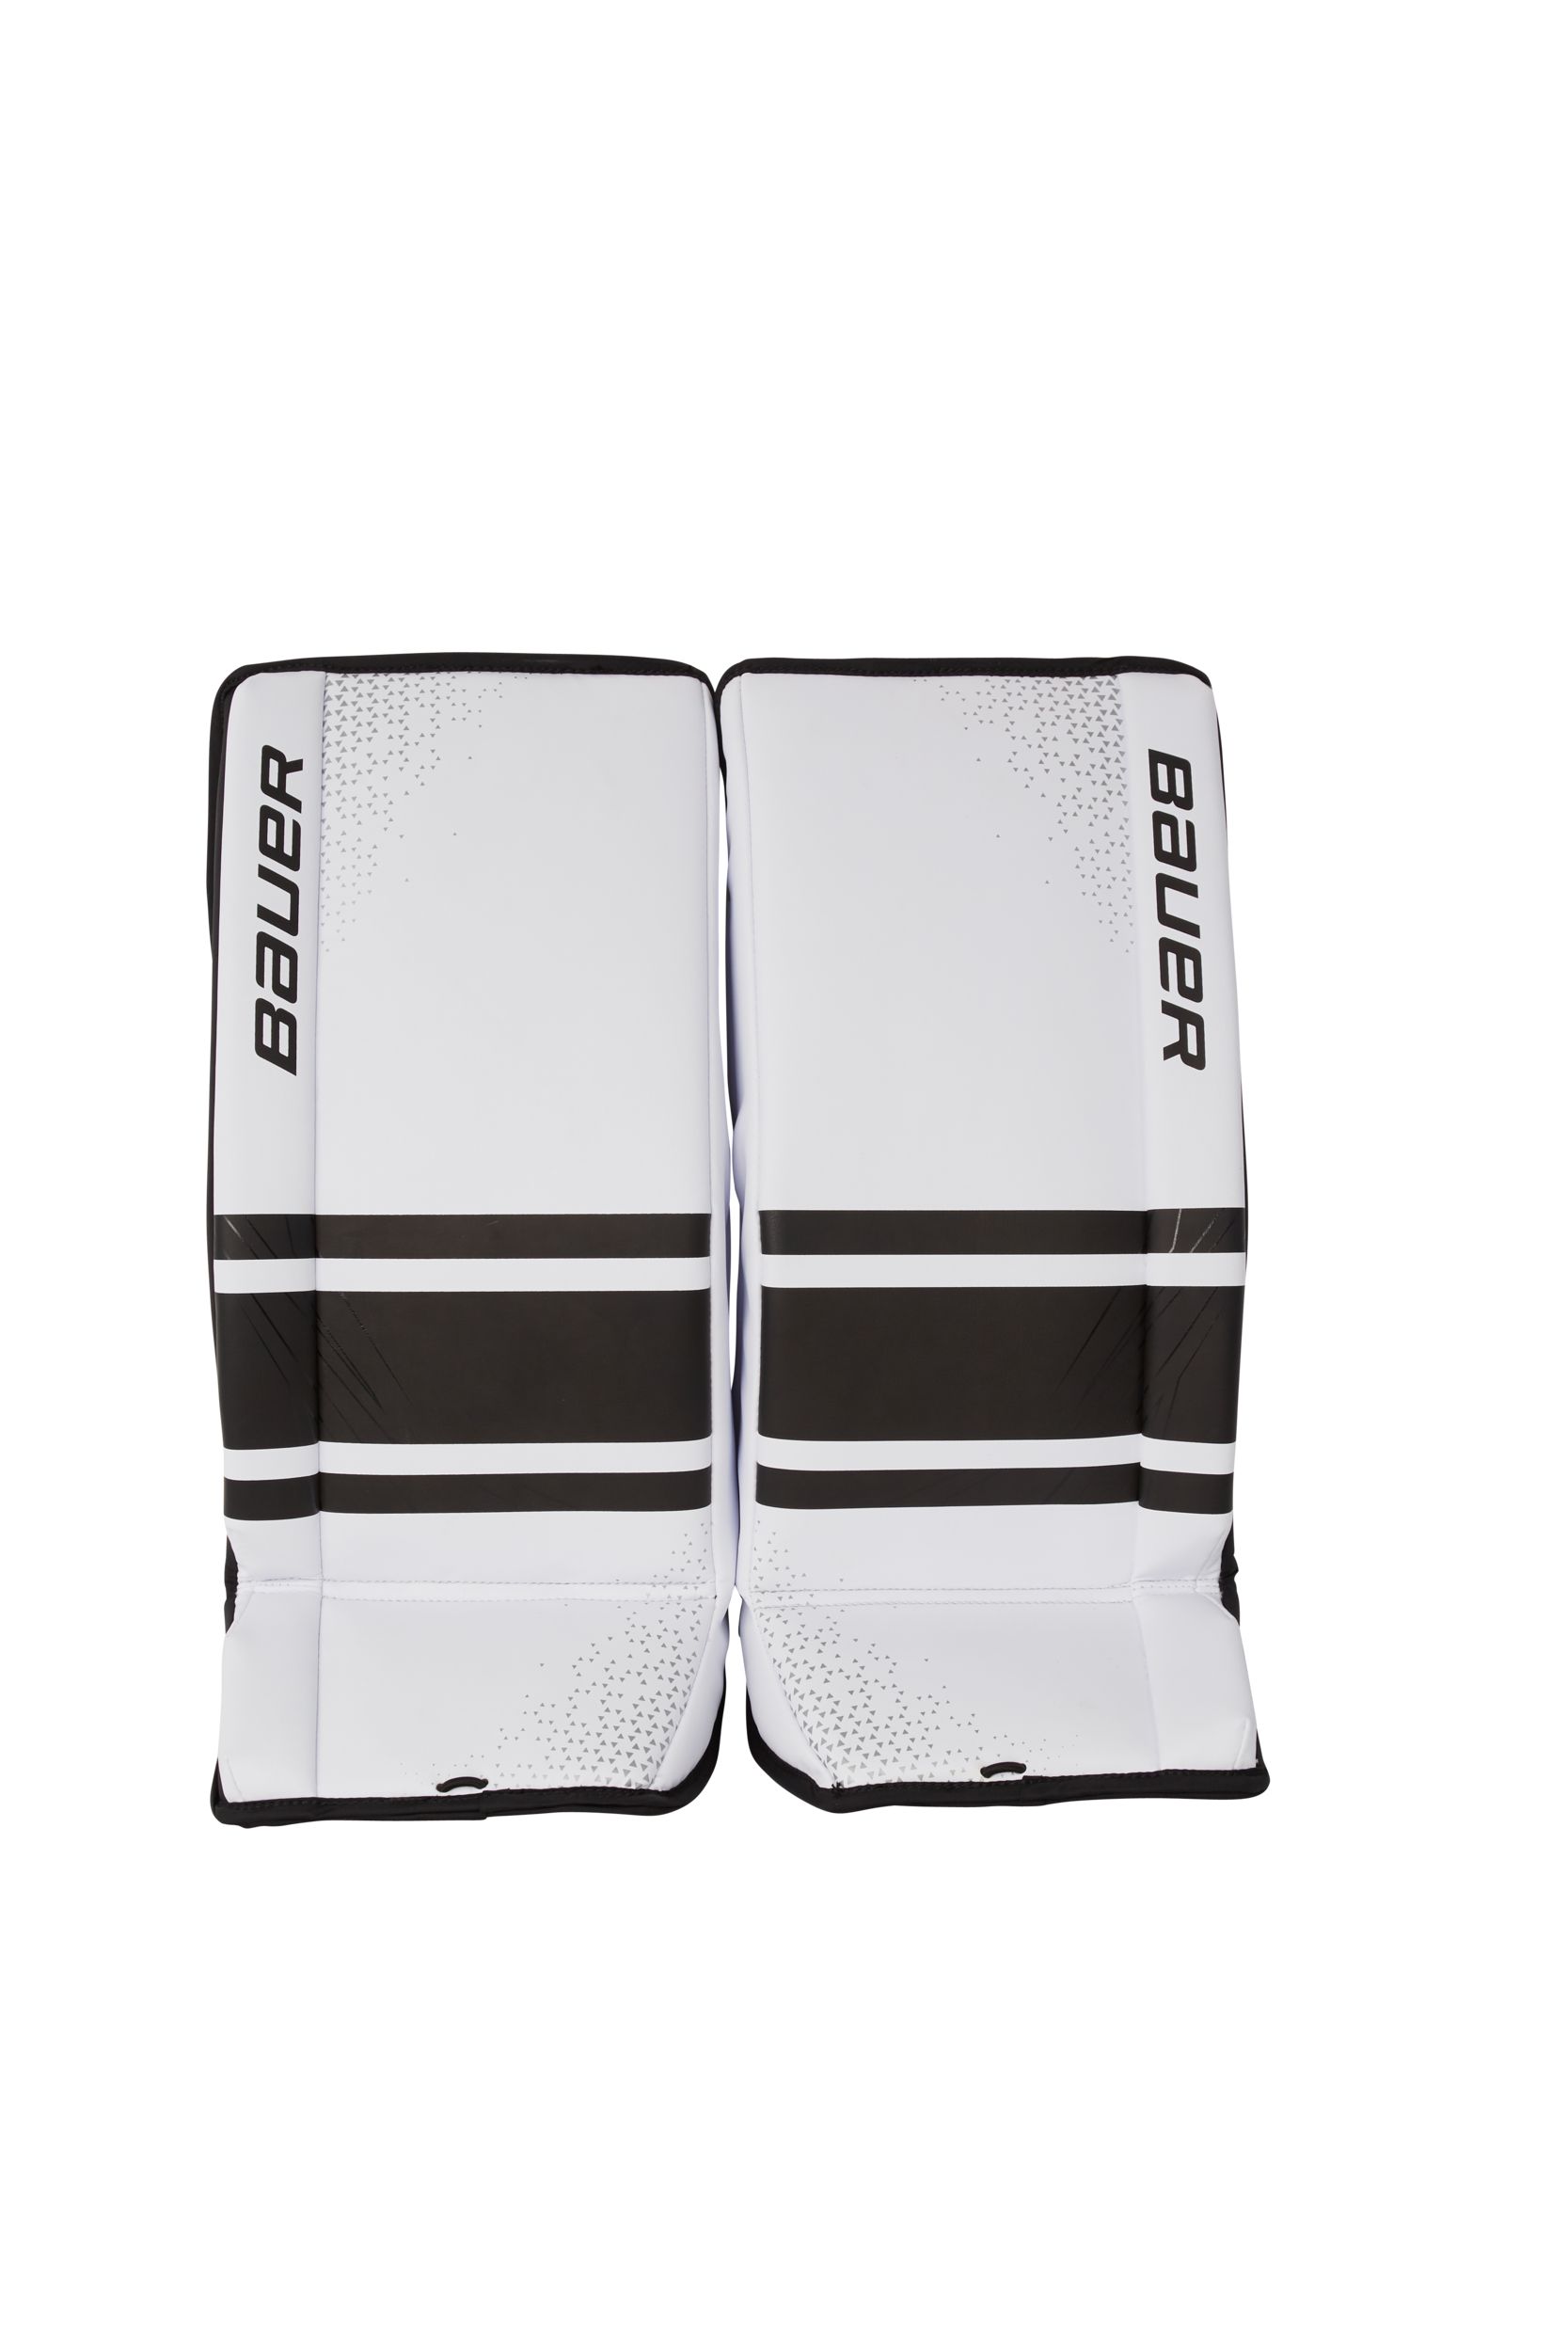 Image of Bauer GSX Youth Goalie Pads